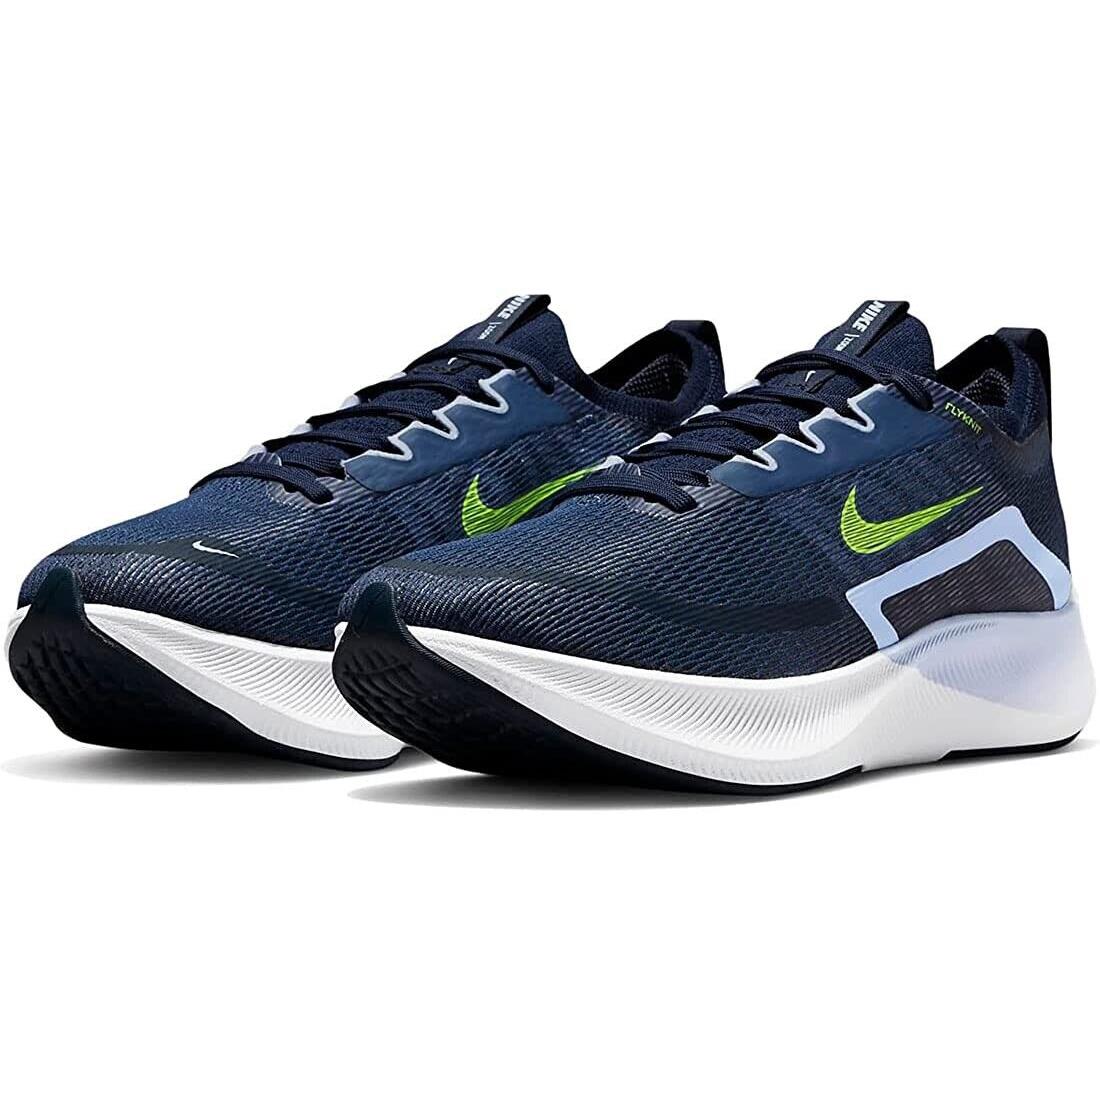 Nike Zoom Fly 4 Womens Size 11.5 Sneaker Shoes CT2401 400 Mystic Navy Volt